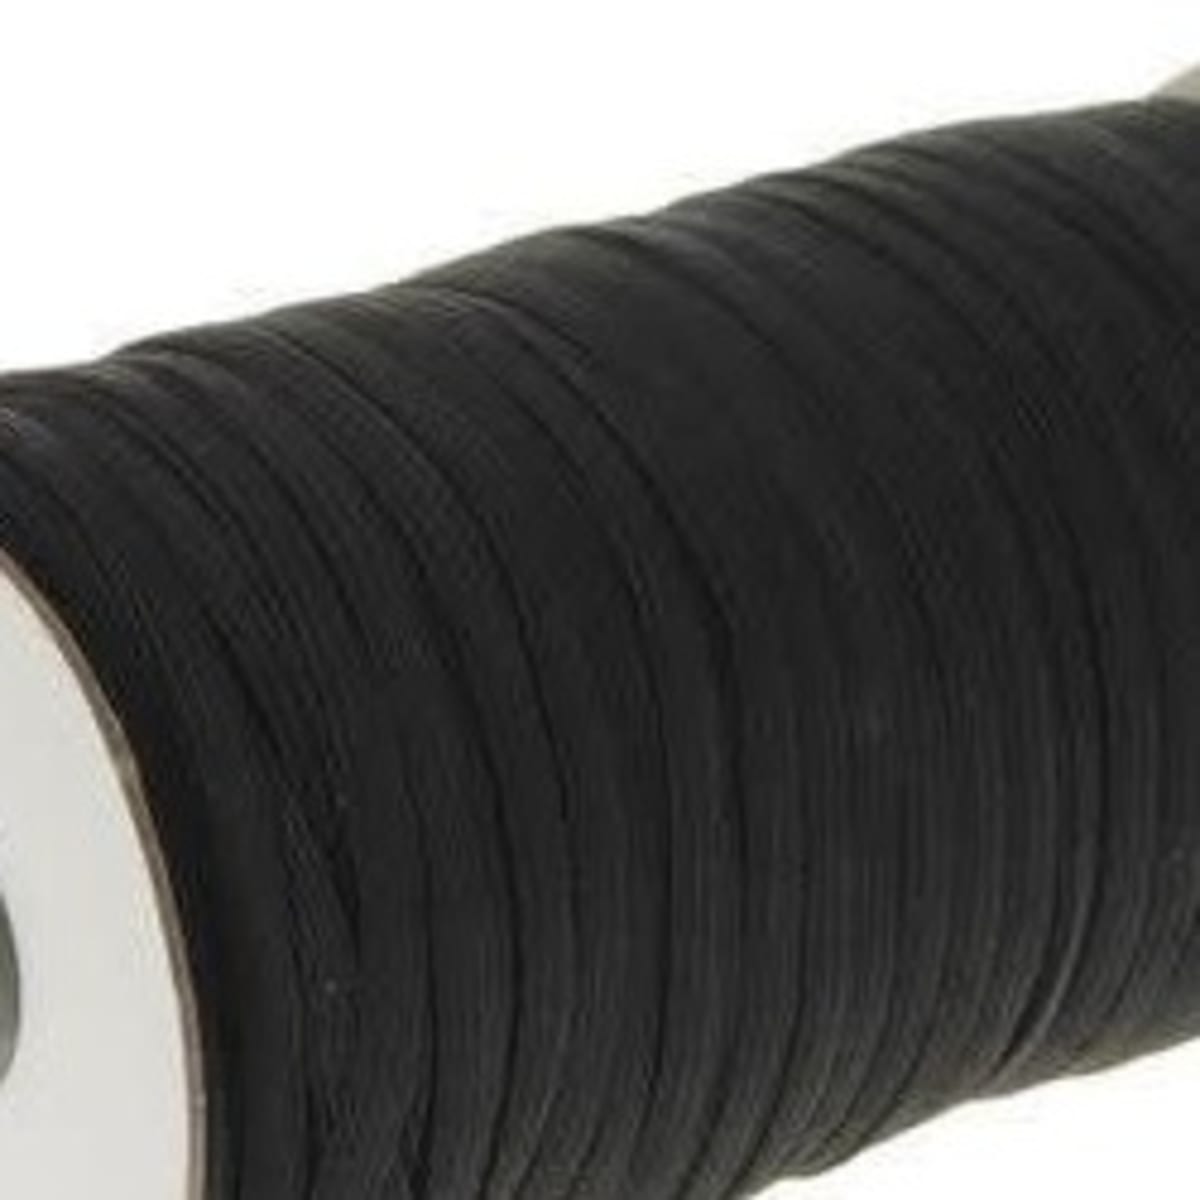 Elastic Band Rope For Sewing & Craft - Black